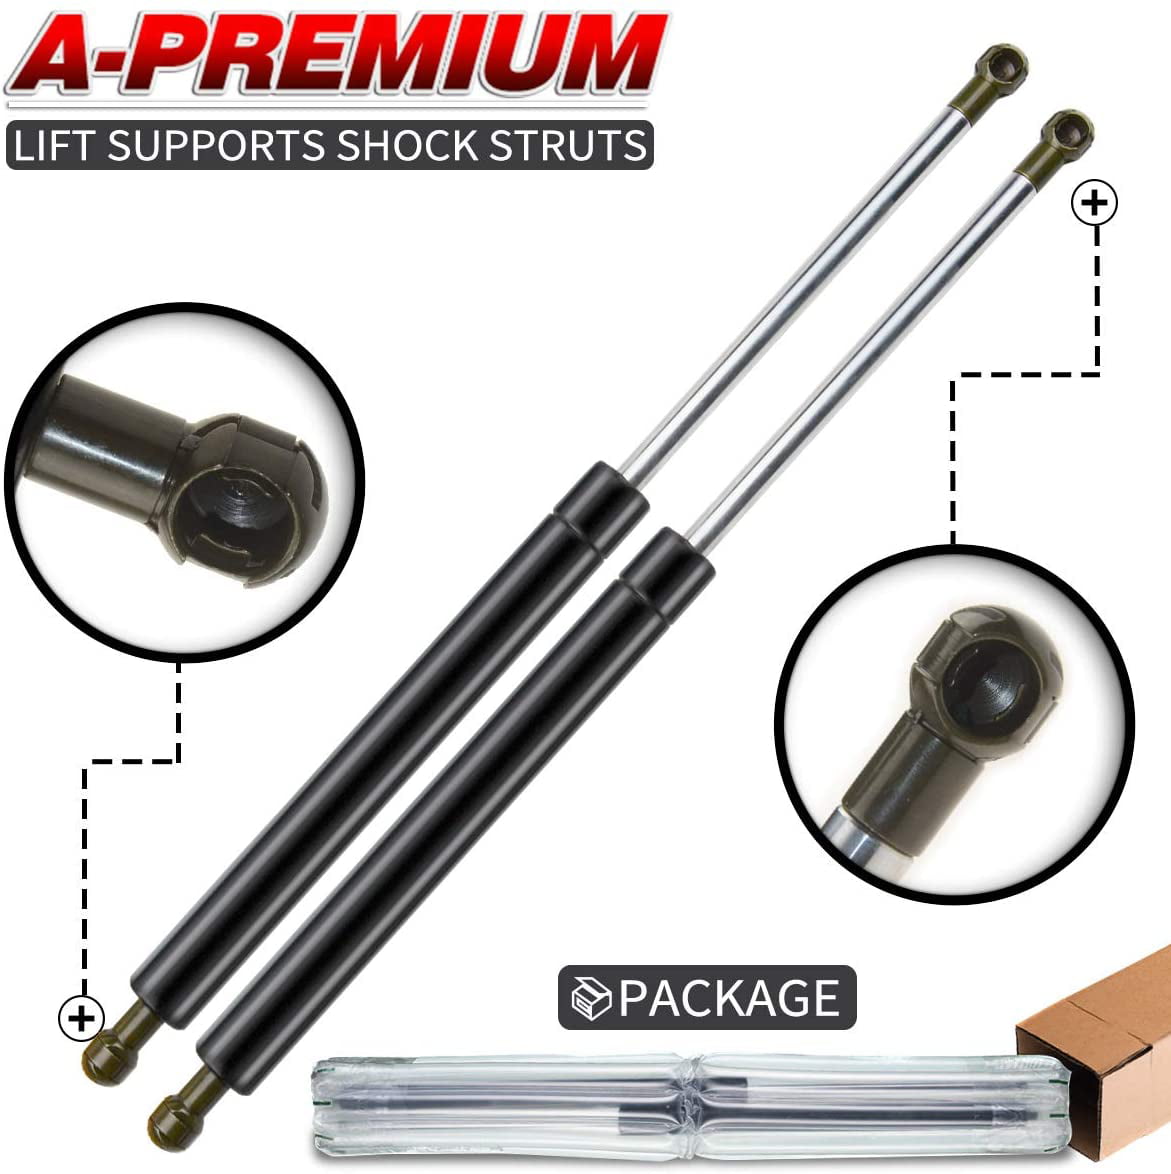 A-Premium Hood Lift Supports Shock Struts for Toyota Celica 1982-1984 Supra 82-93 2-PC Set Century Huateng Network Overseas Limited